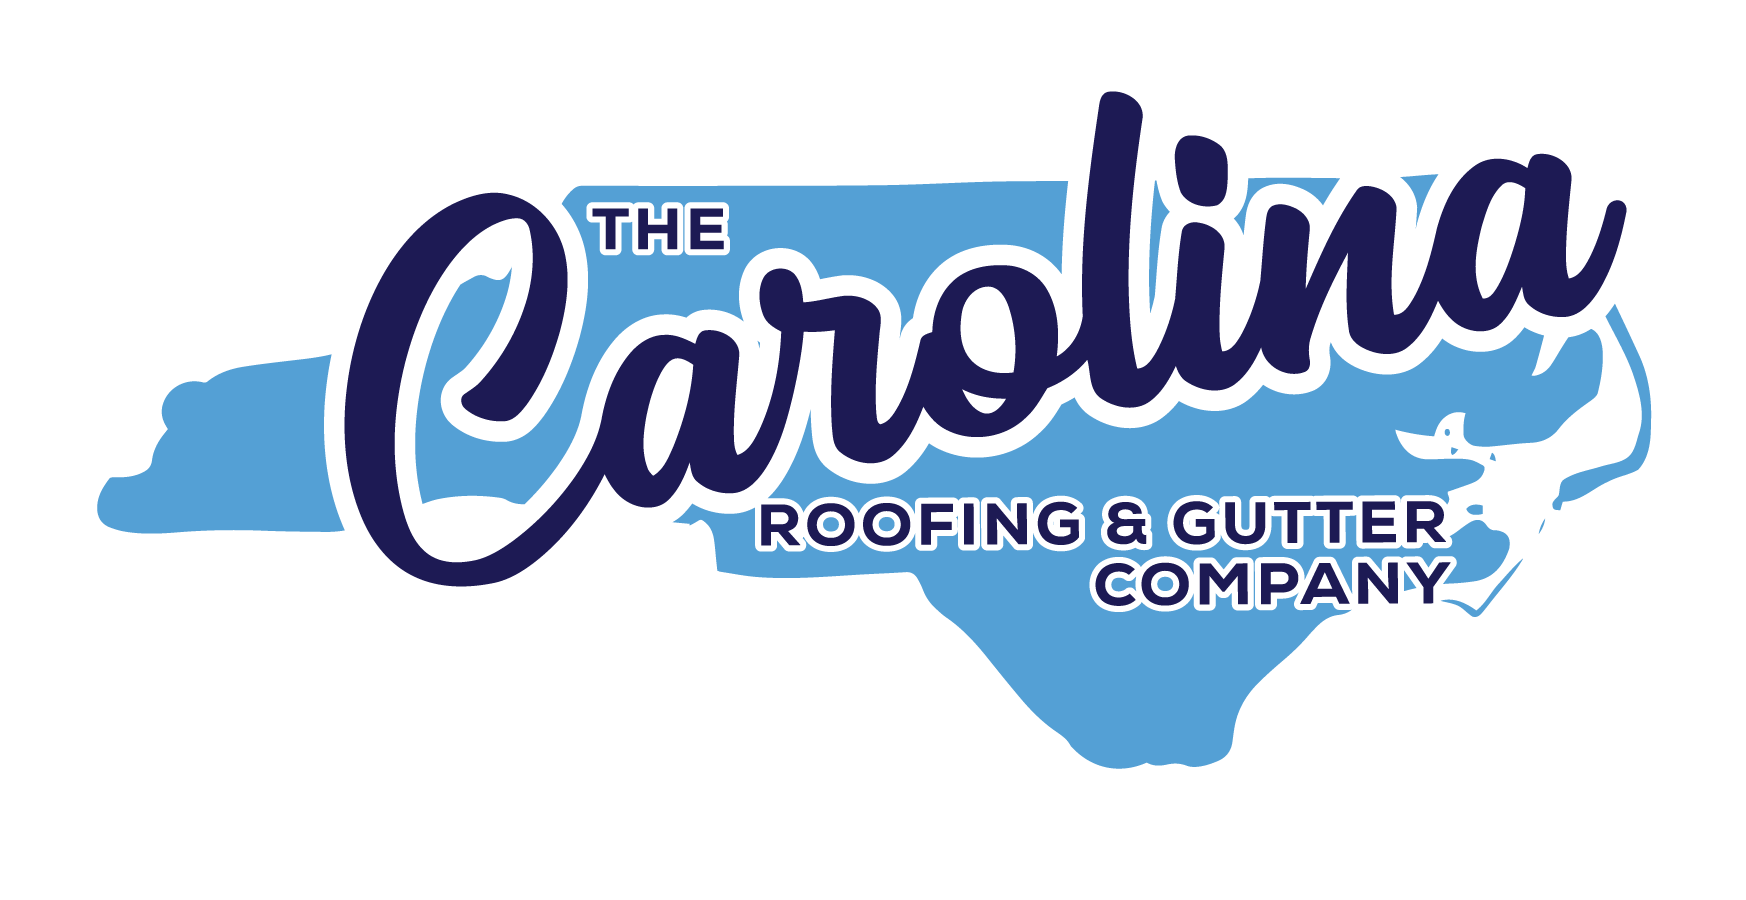 The Carolina Roofing and Gutter Company Logo